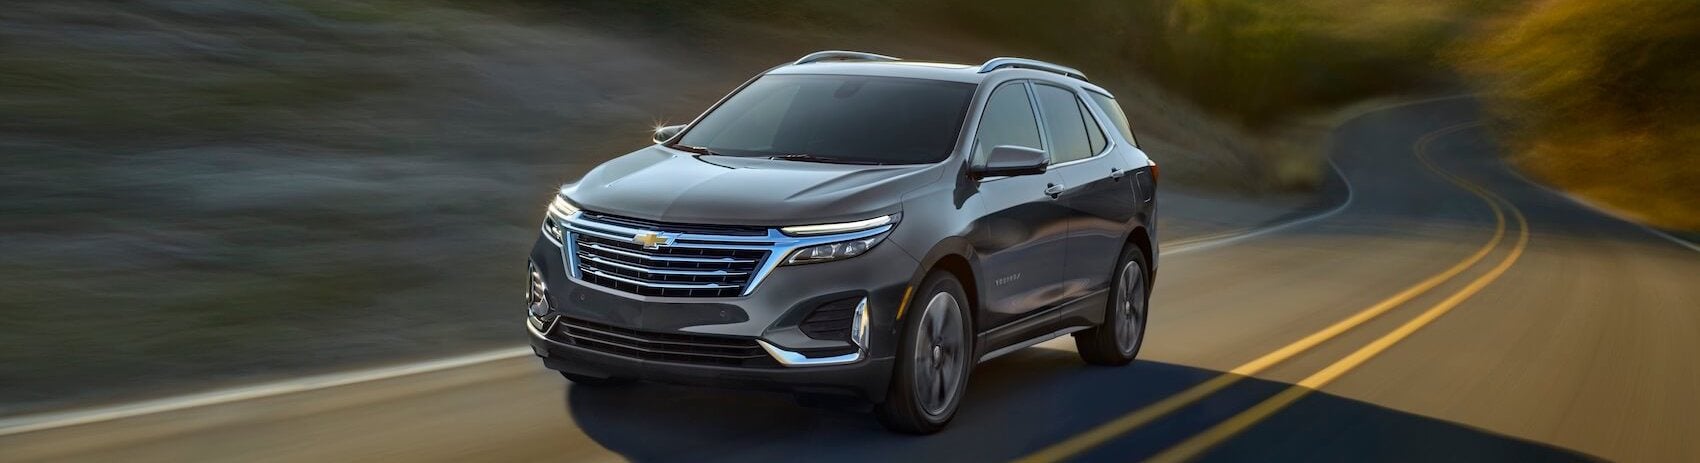 Chevy Equinox Review